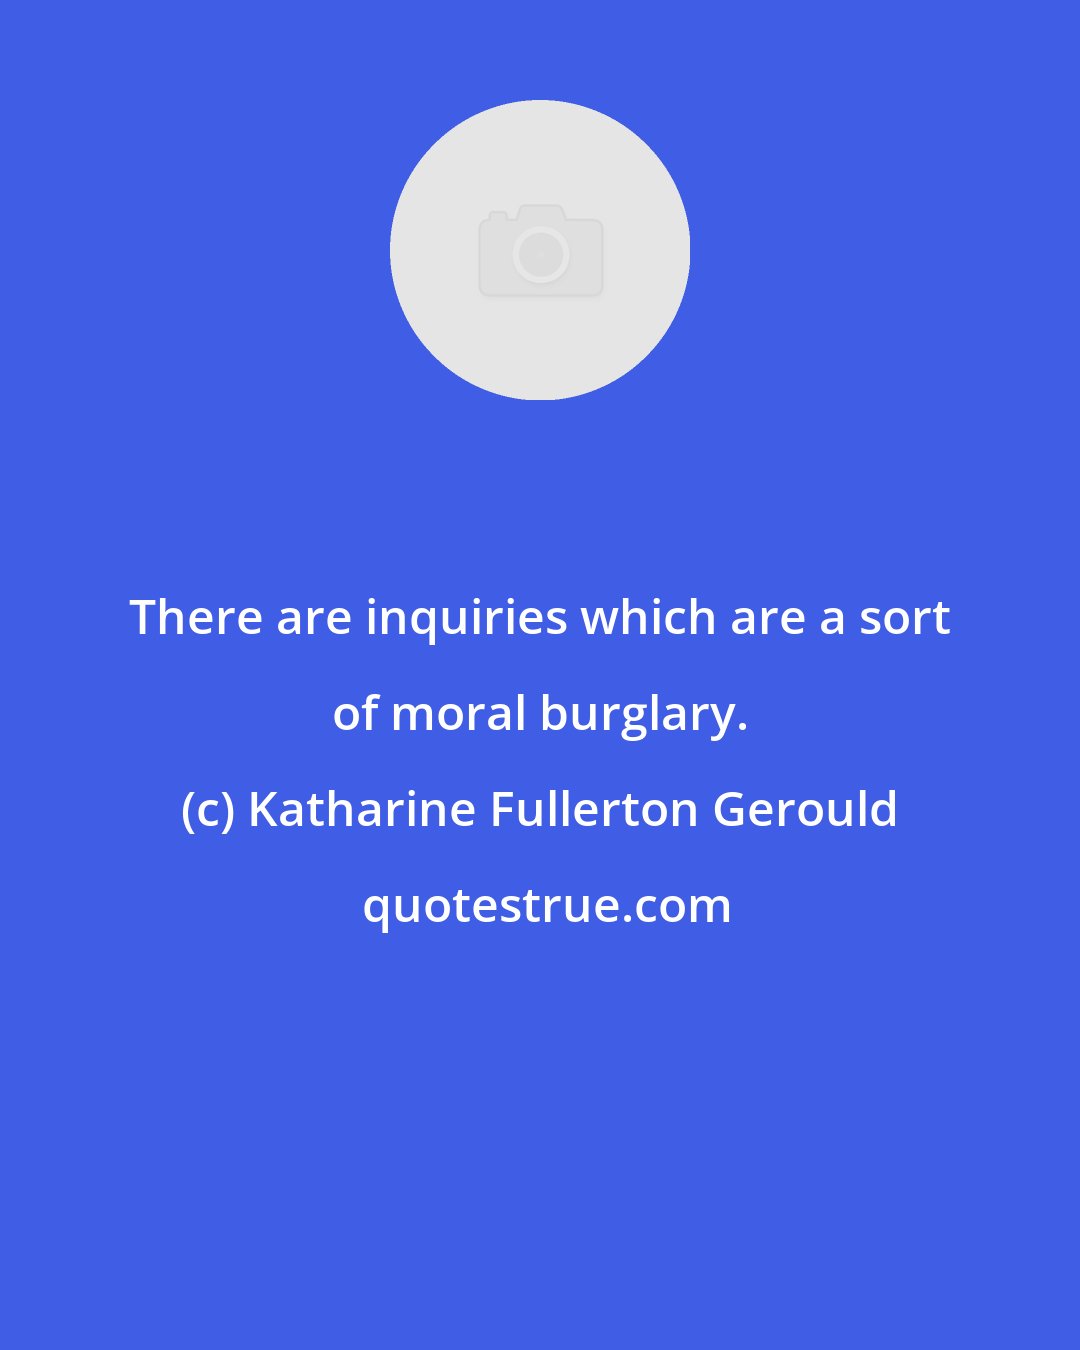 Katharine Fullerton Gerould: There are inquiries which are a sort of moral burglary.